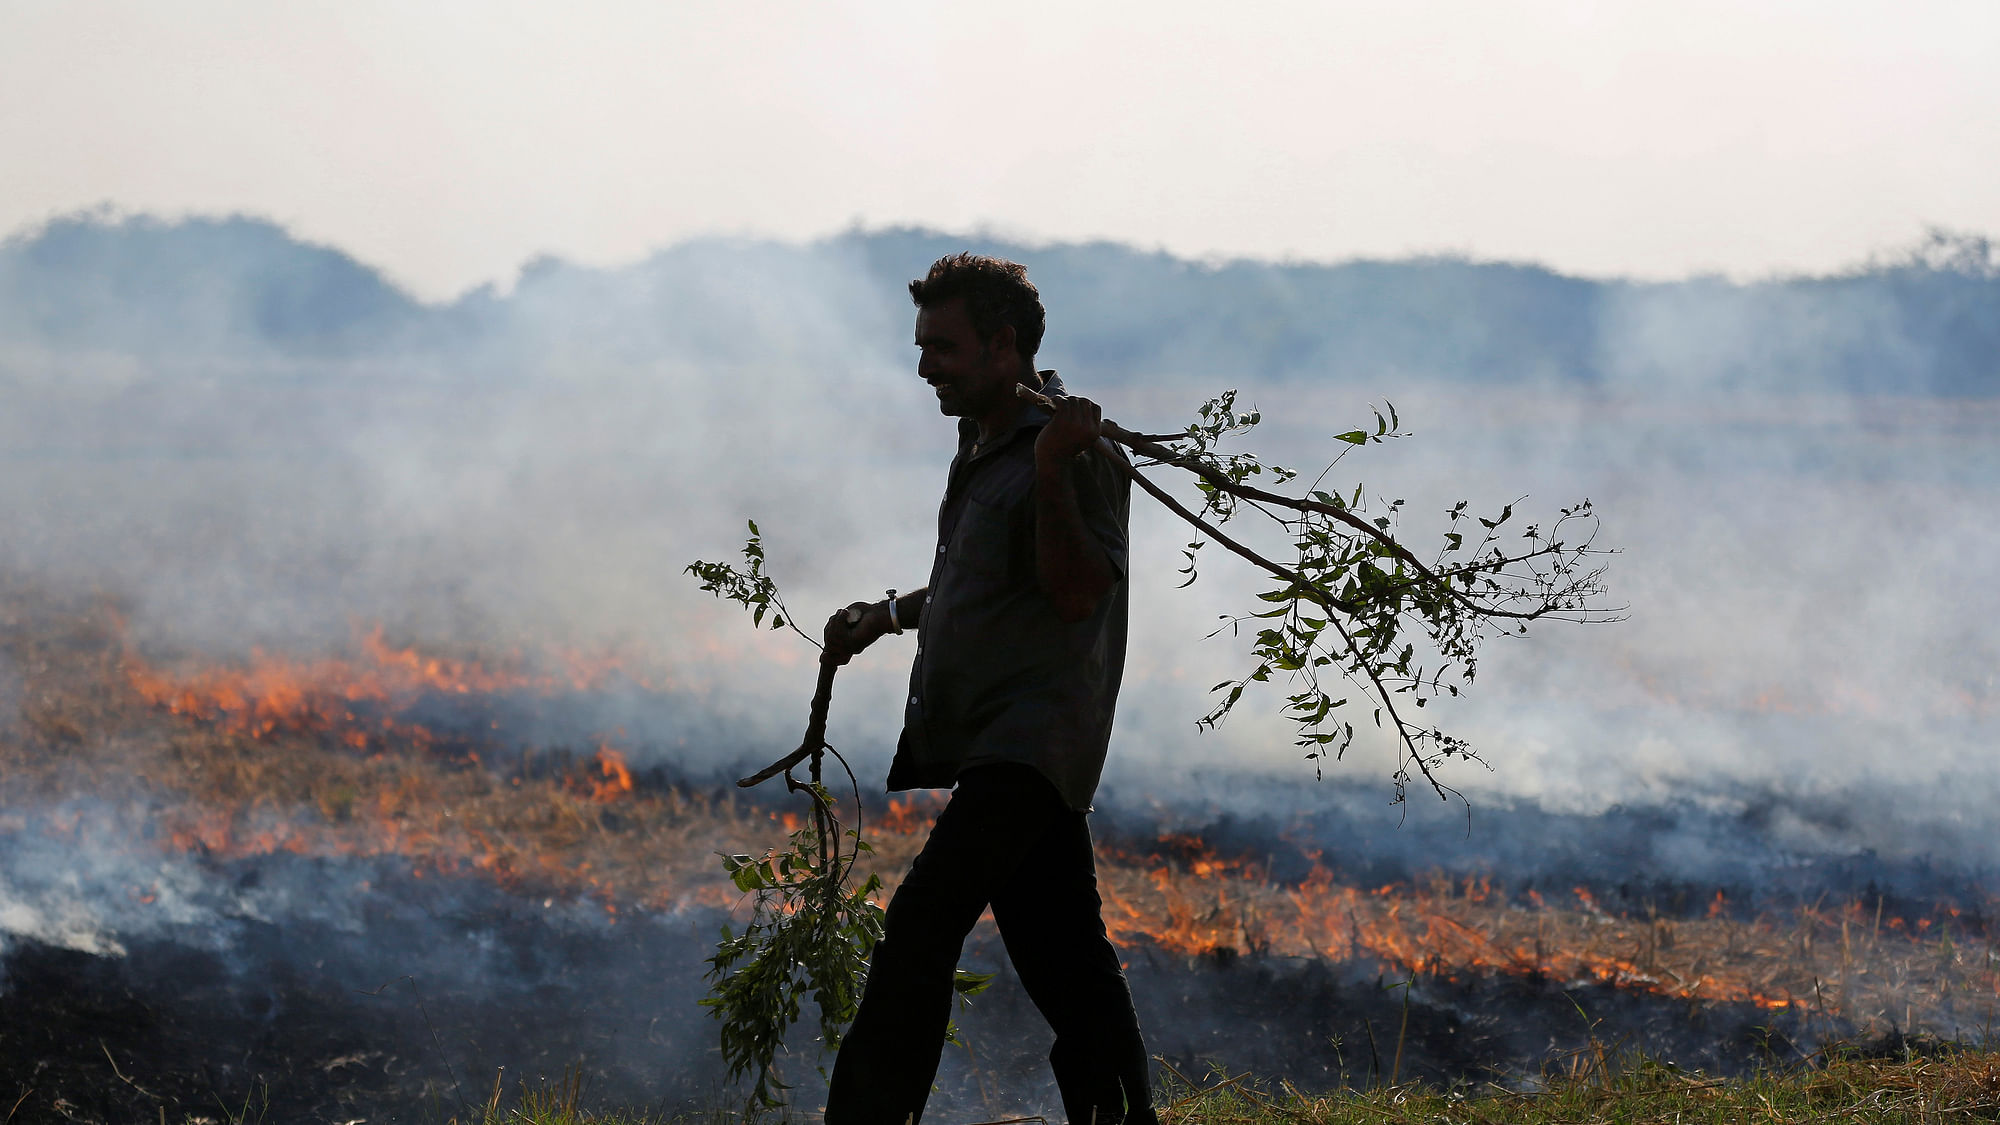 A farmer burns the stubble left behind after harvesting crops.